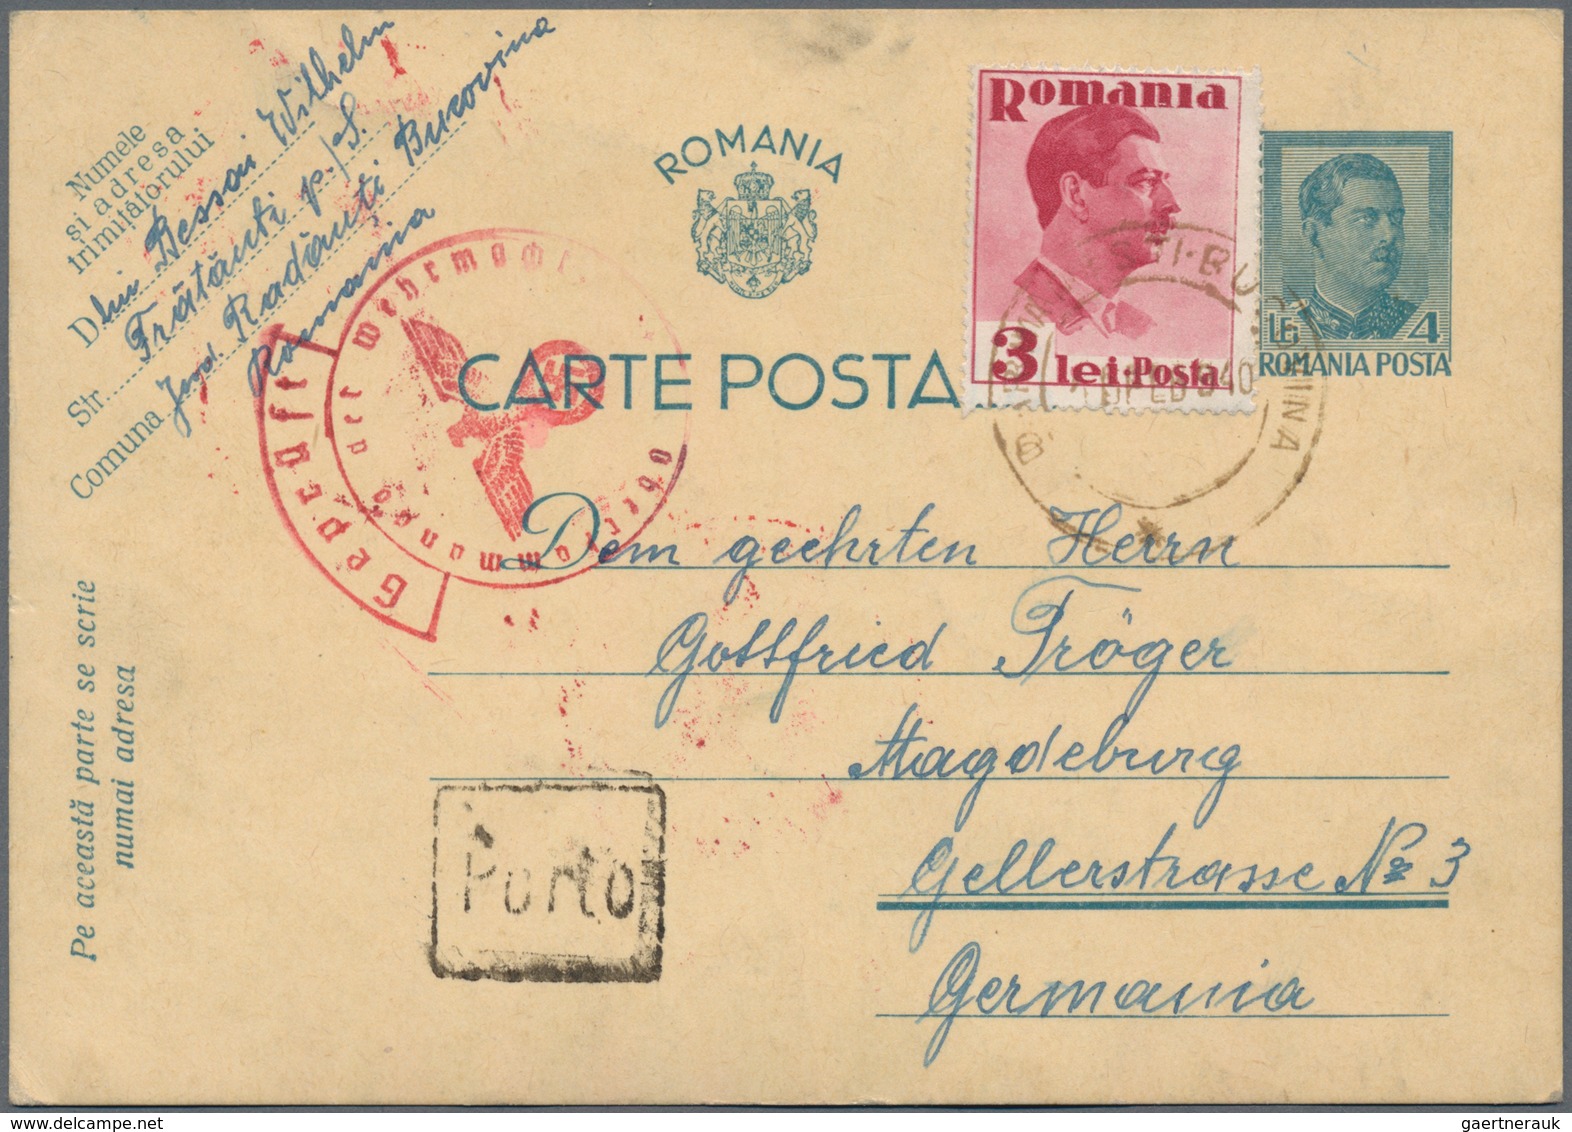 Rumänien - Ganzsachen: 1877/2005, sophisticated holding of apprx. 674 commercially used stationeries